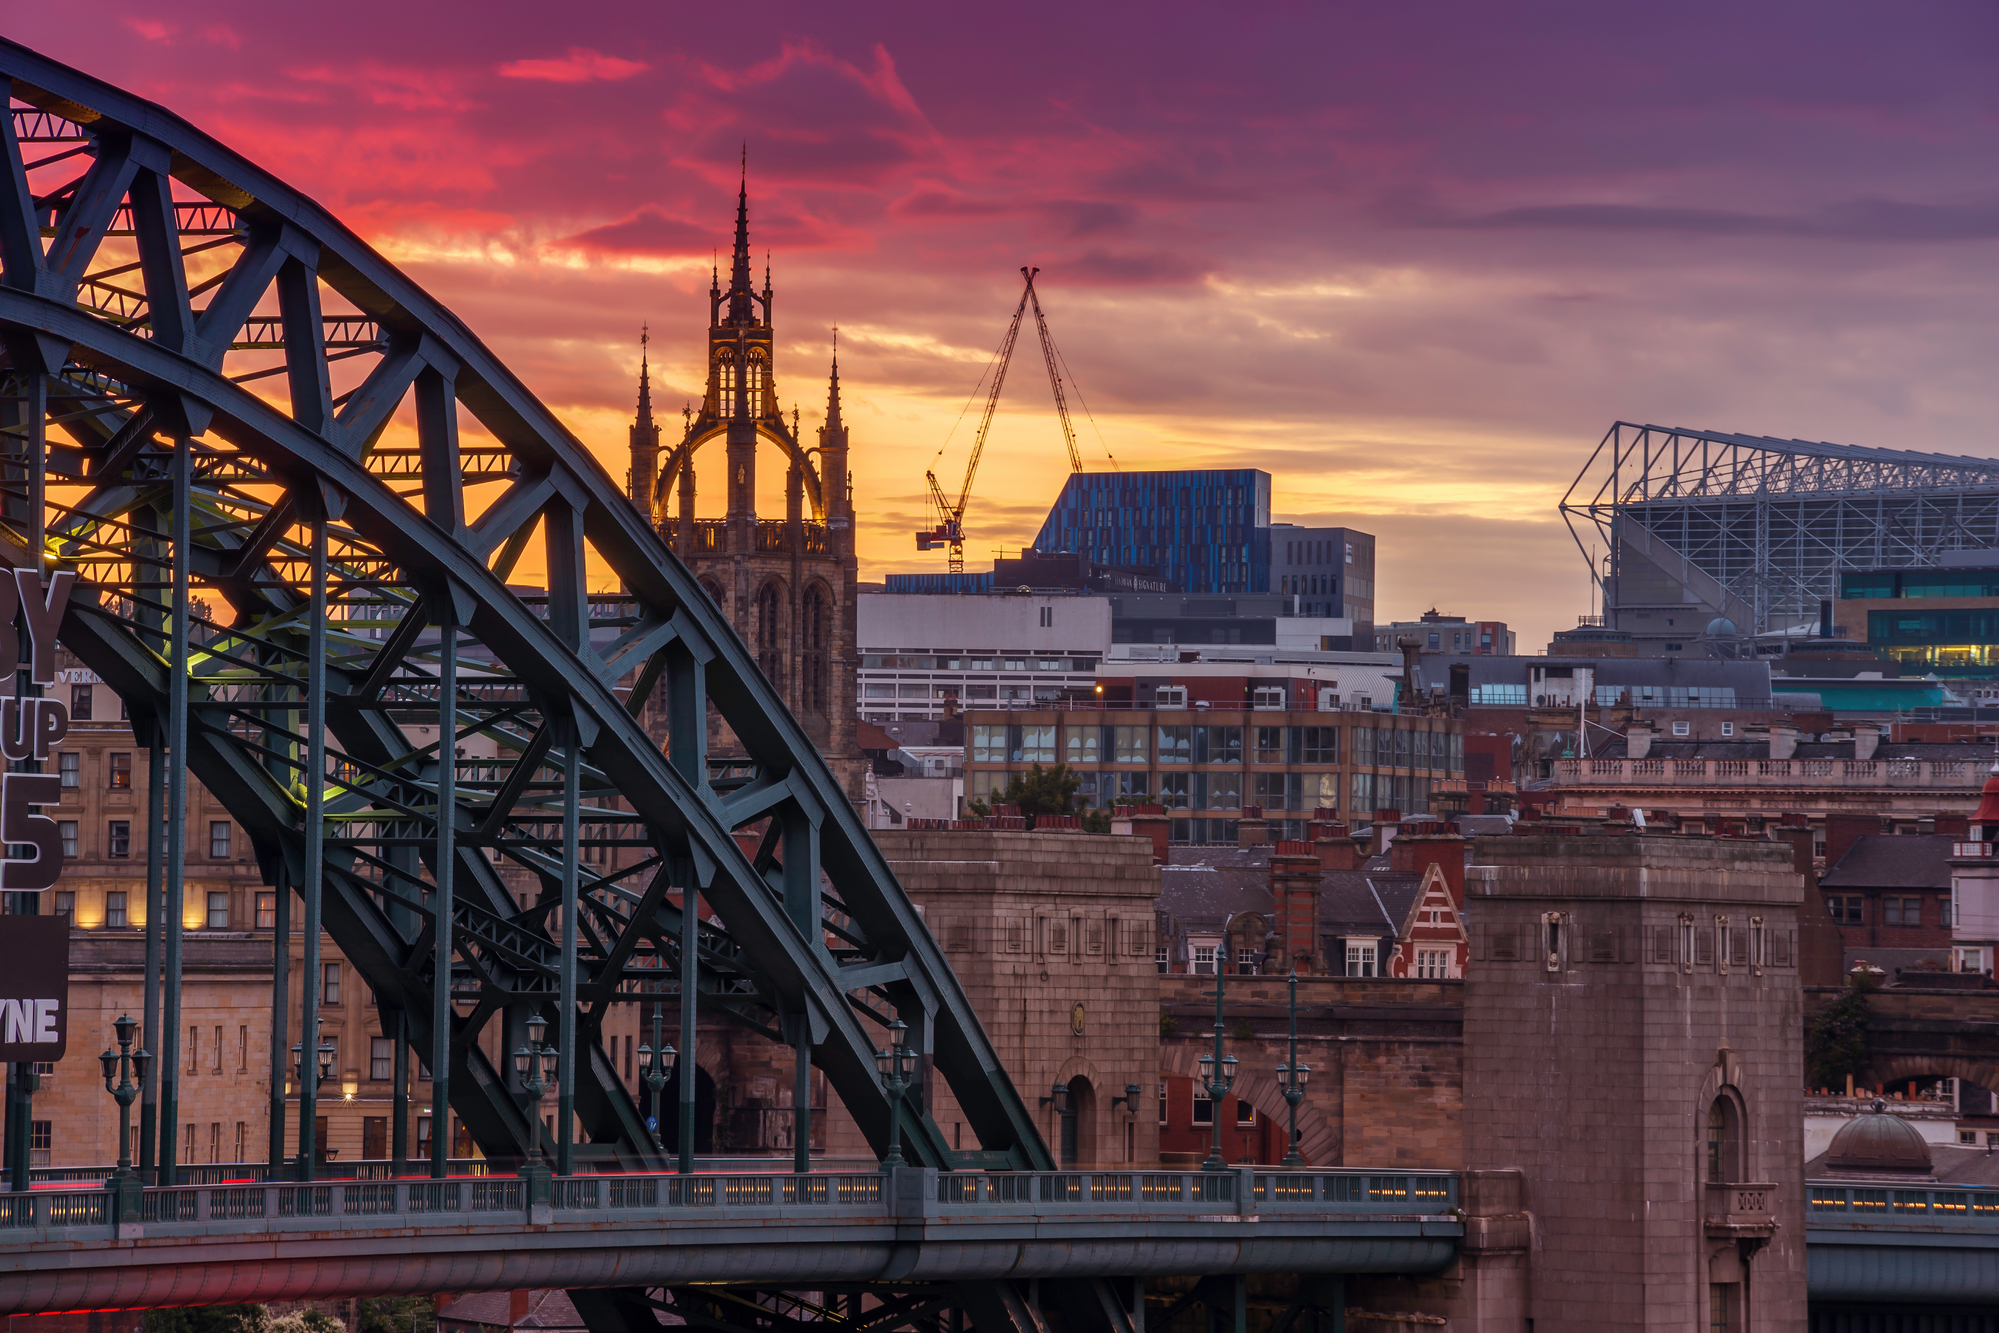 view of the the Tyne Bridge and cityscape at dusk